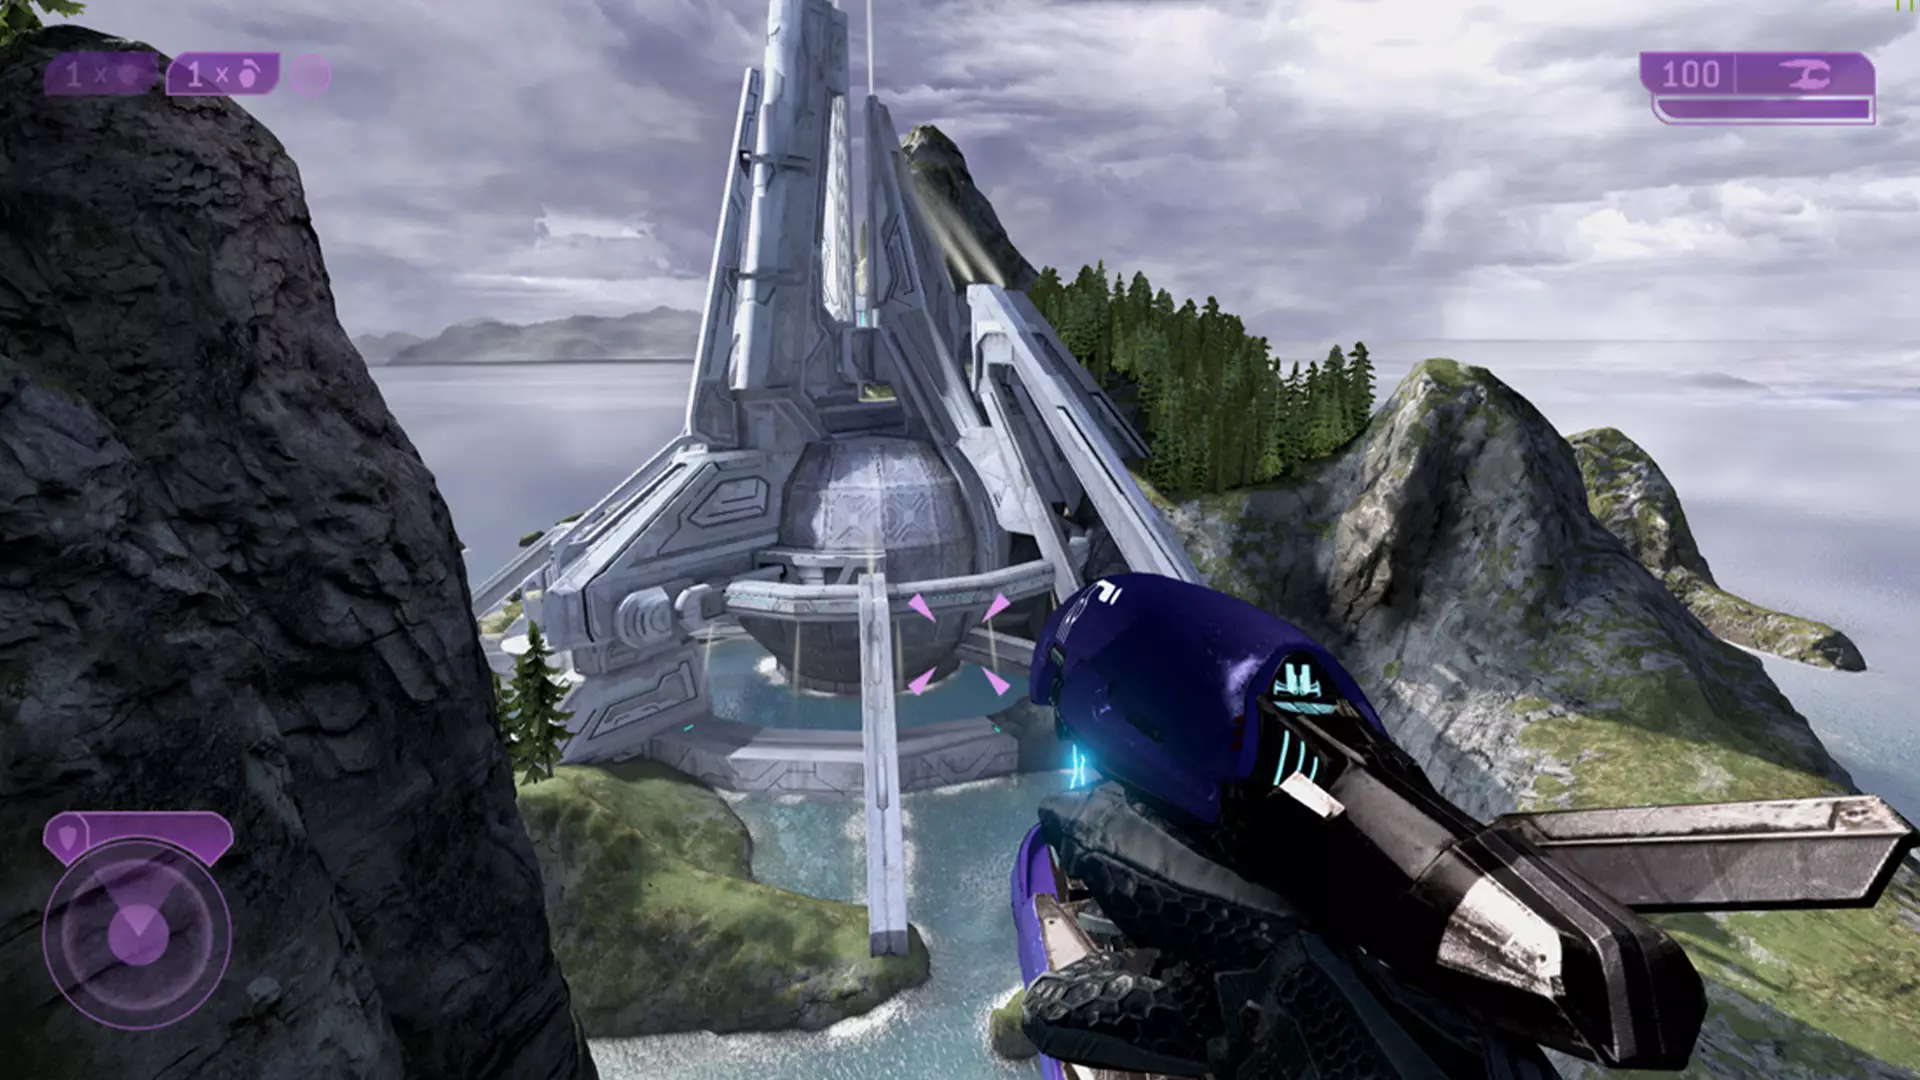 Halo 2 in Halo: The Master Chief Collection /